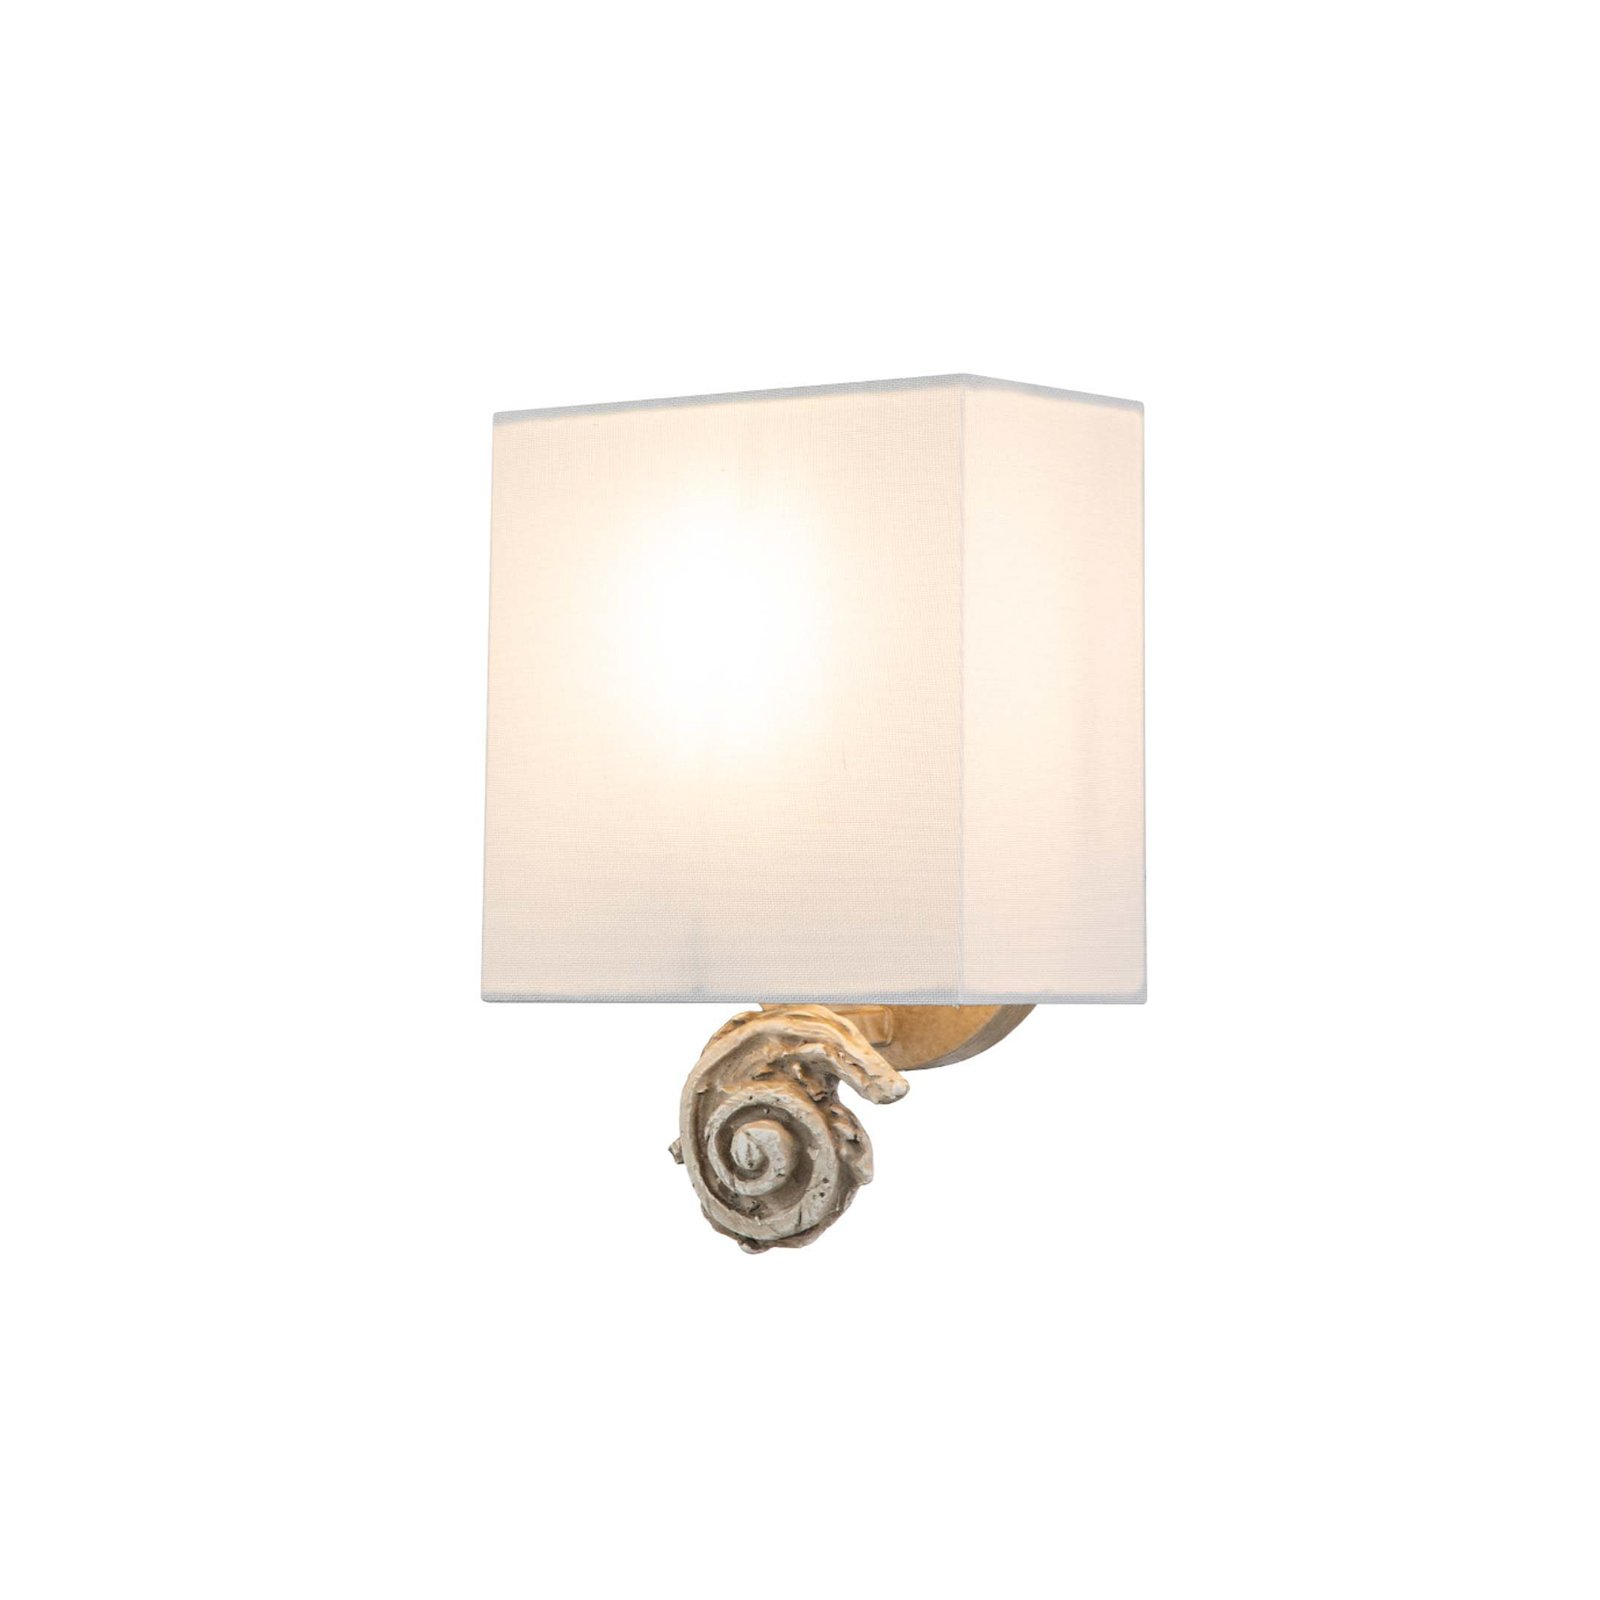 Swirl Small wall light with linen shade, antique white